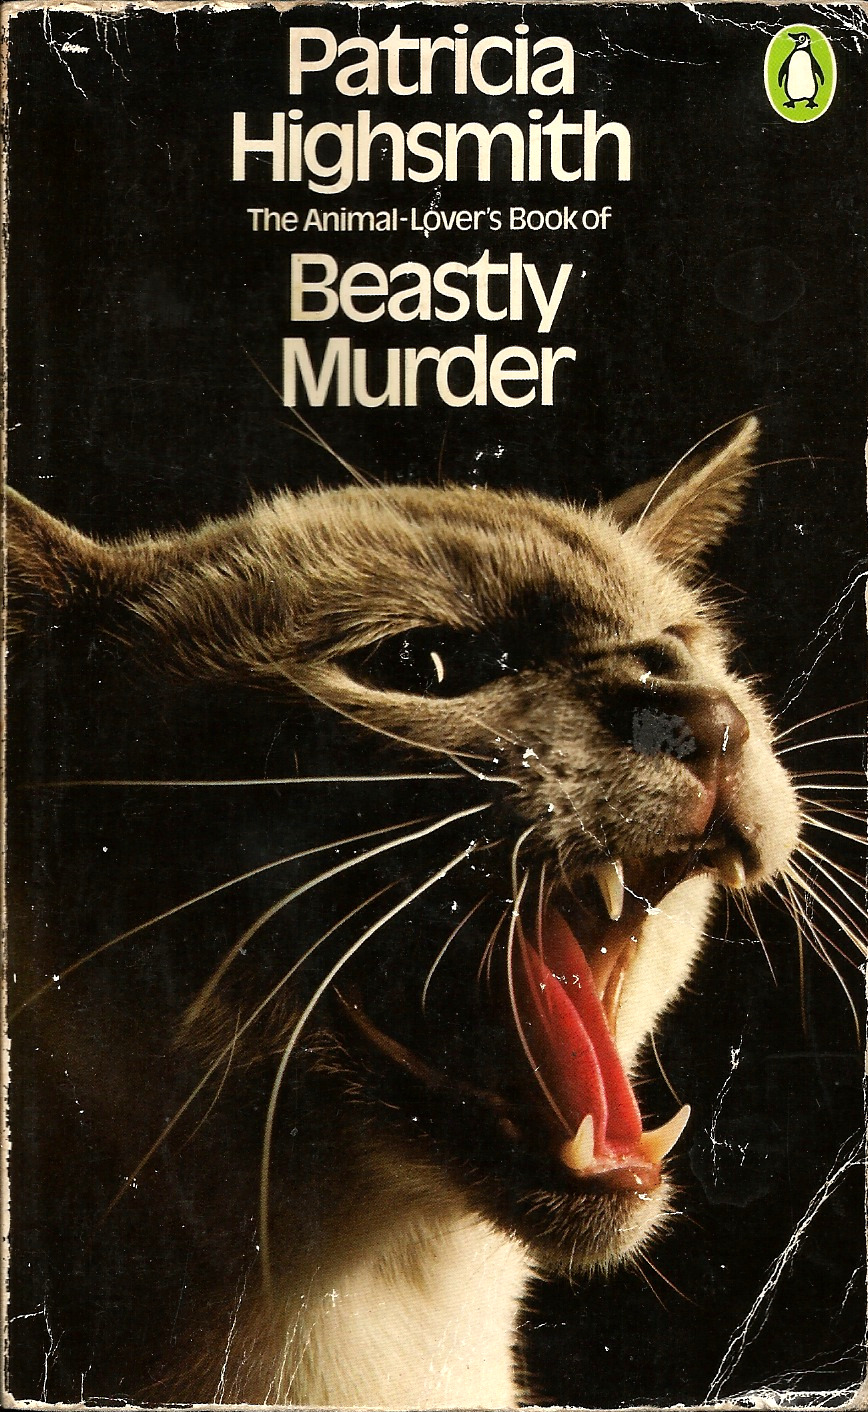 The Animal-Lover’s Book of Beastly Murder, by Patricia Highsmith (Penguin, 1979)